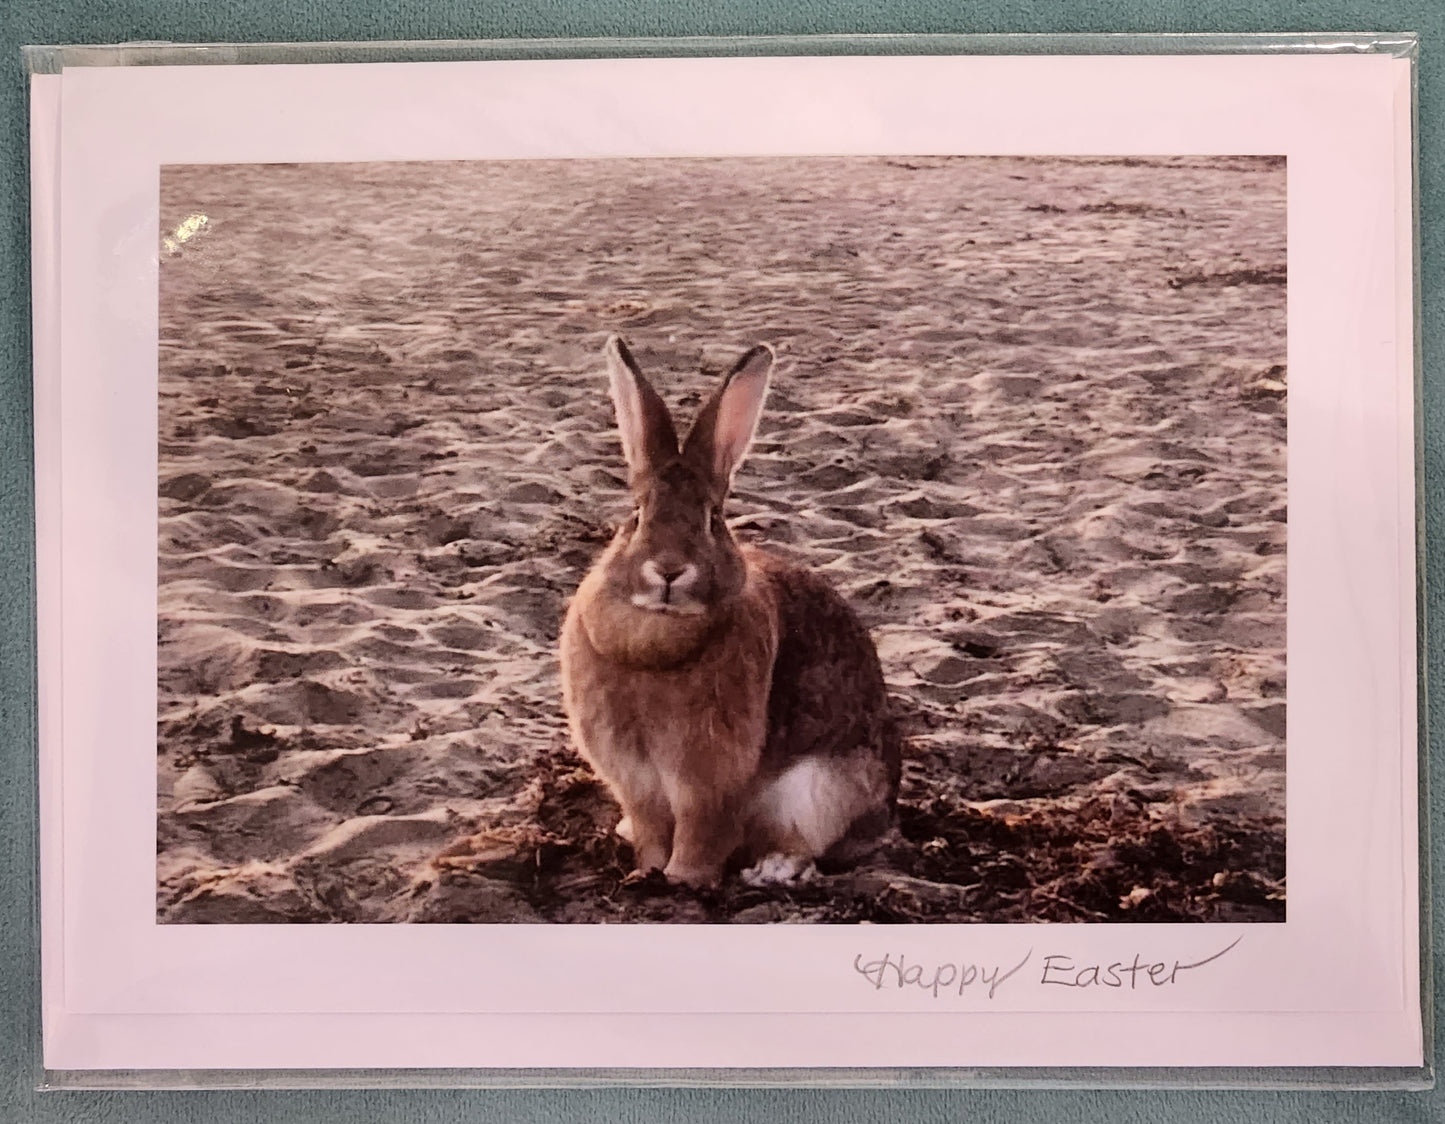 BARBSCARDS HAPPY EASTER COLLECTION: BEACH BUNNY